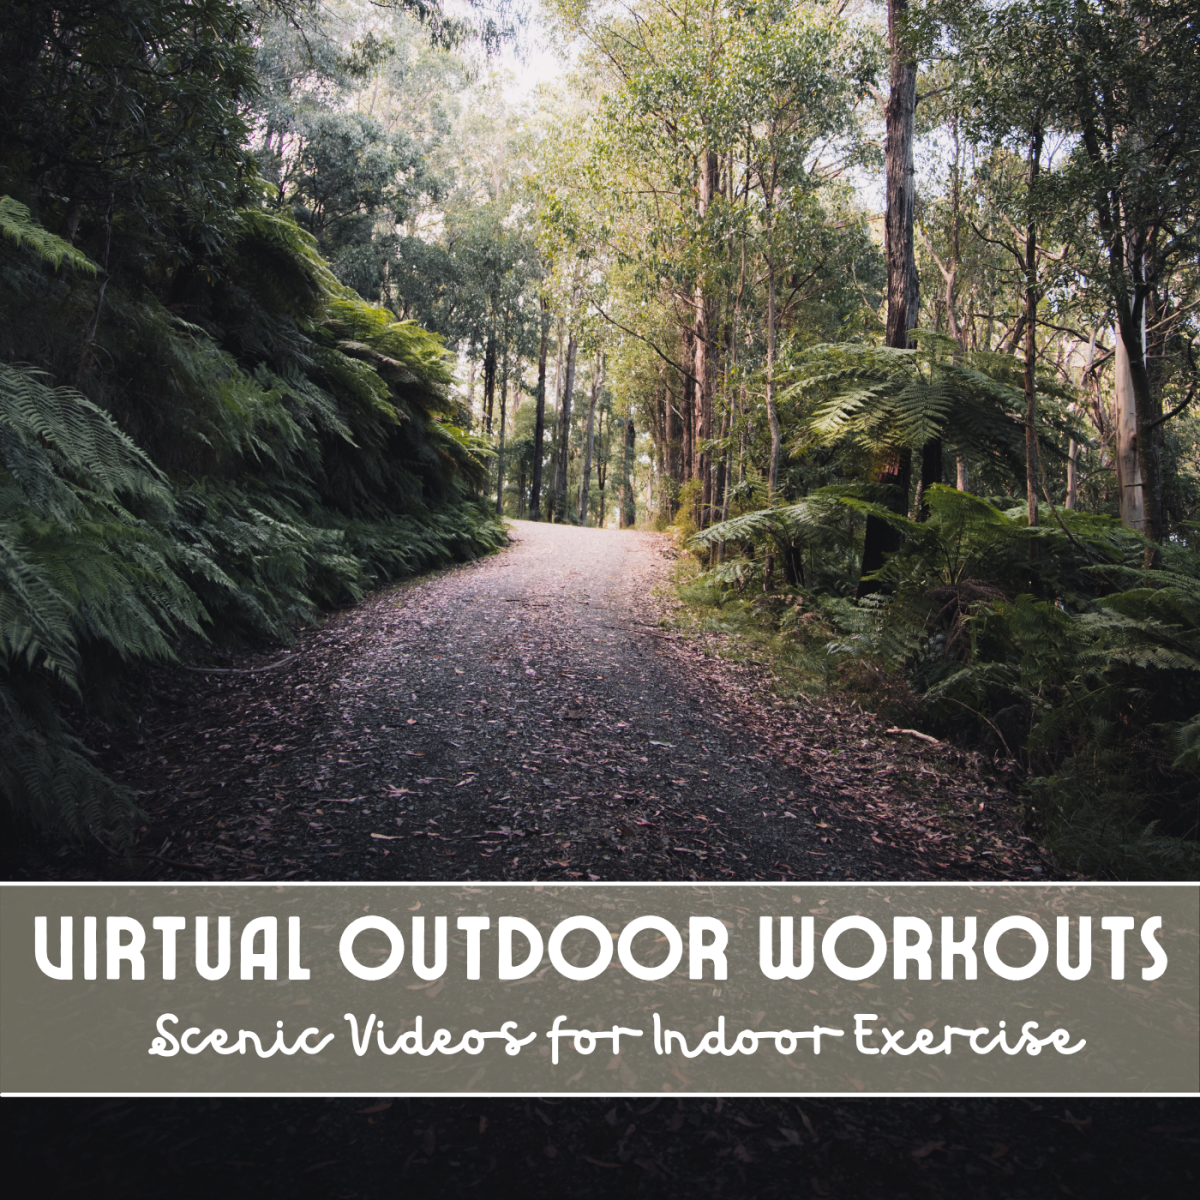 Virtual Outdoor Workouts: Scenic Videos for Indoor Cycling, Running and Rowing